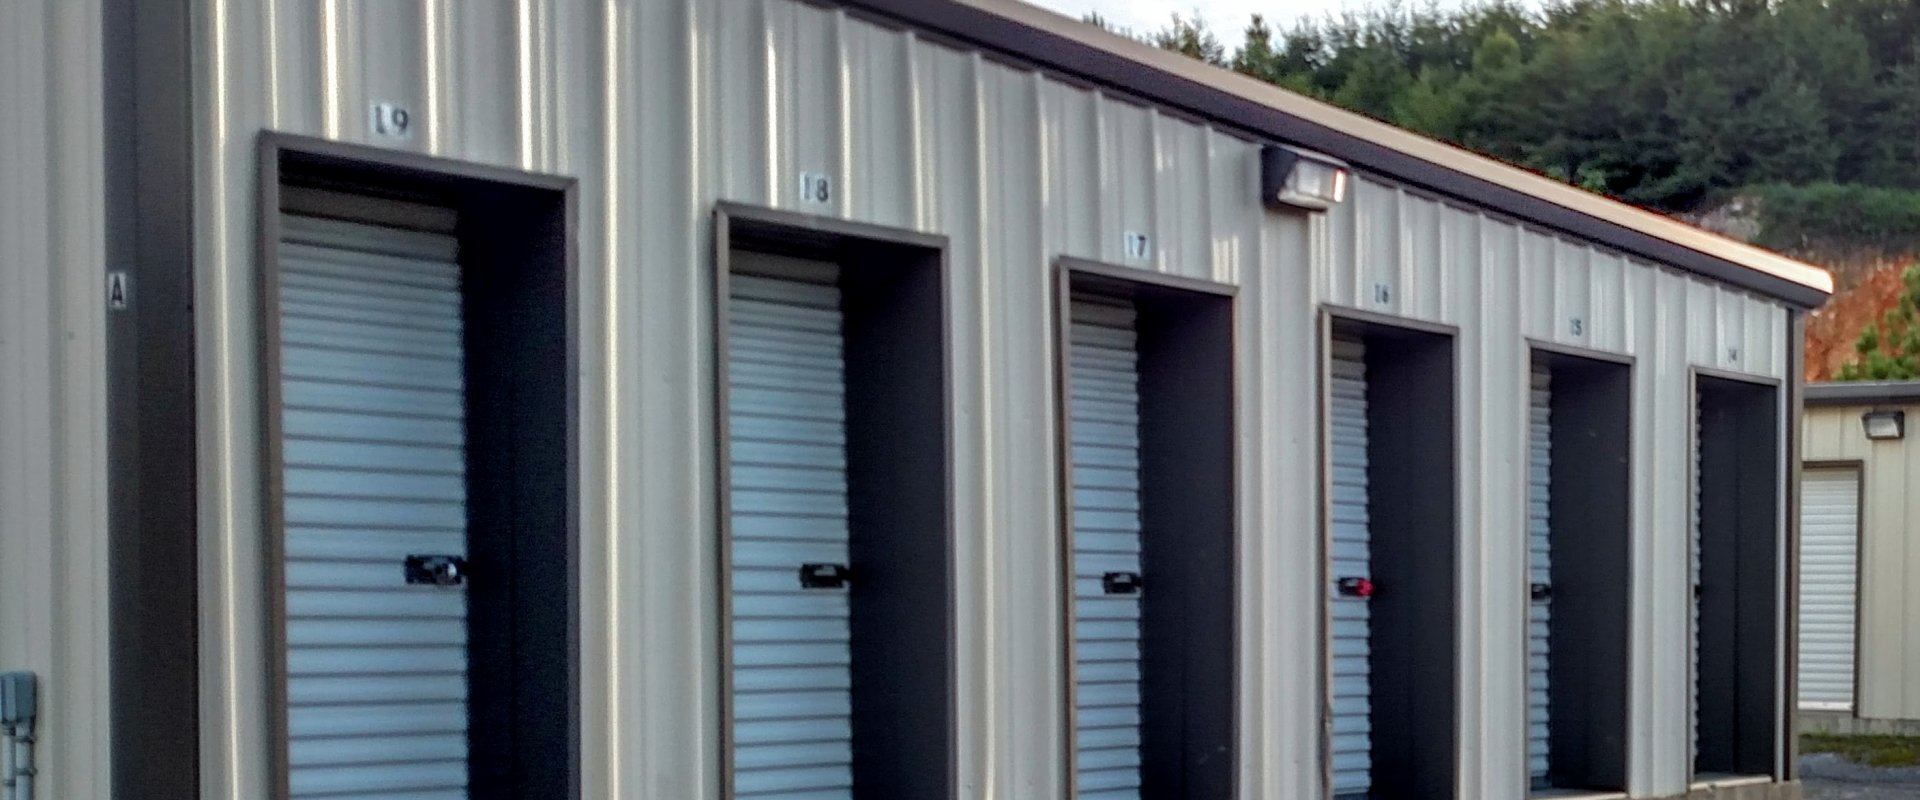 South Lee Storage Units Small